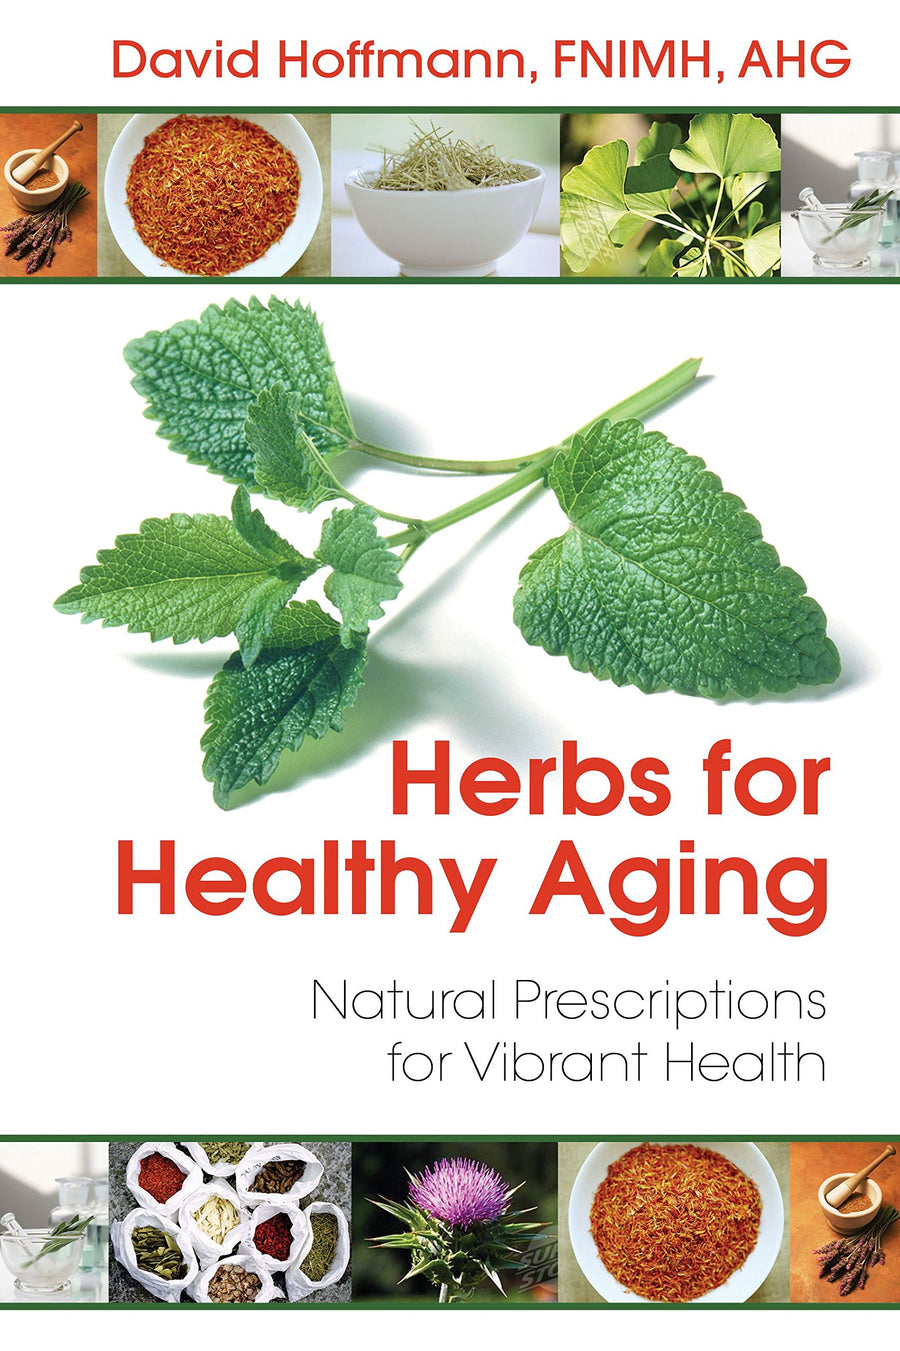 Herbs for Healthy Aging